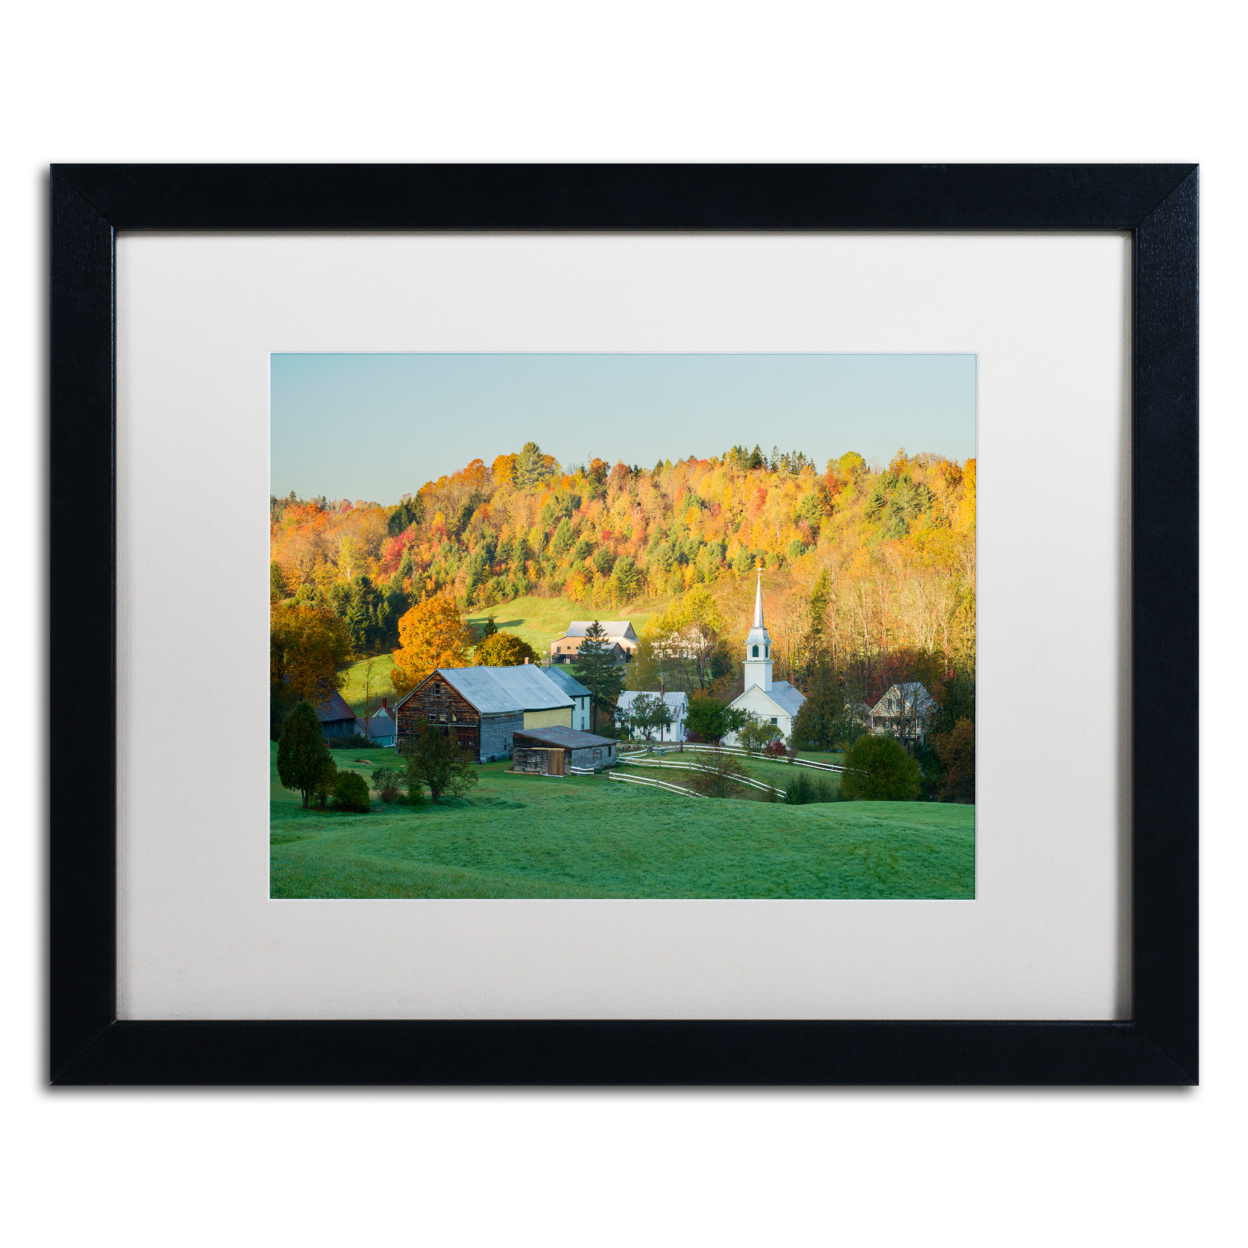 Michael Blanchette Photography 'Fall Pastoral' Black Wooden Framed Art 18 X 22 Inches